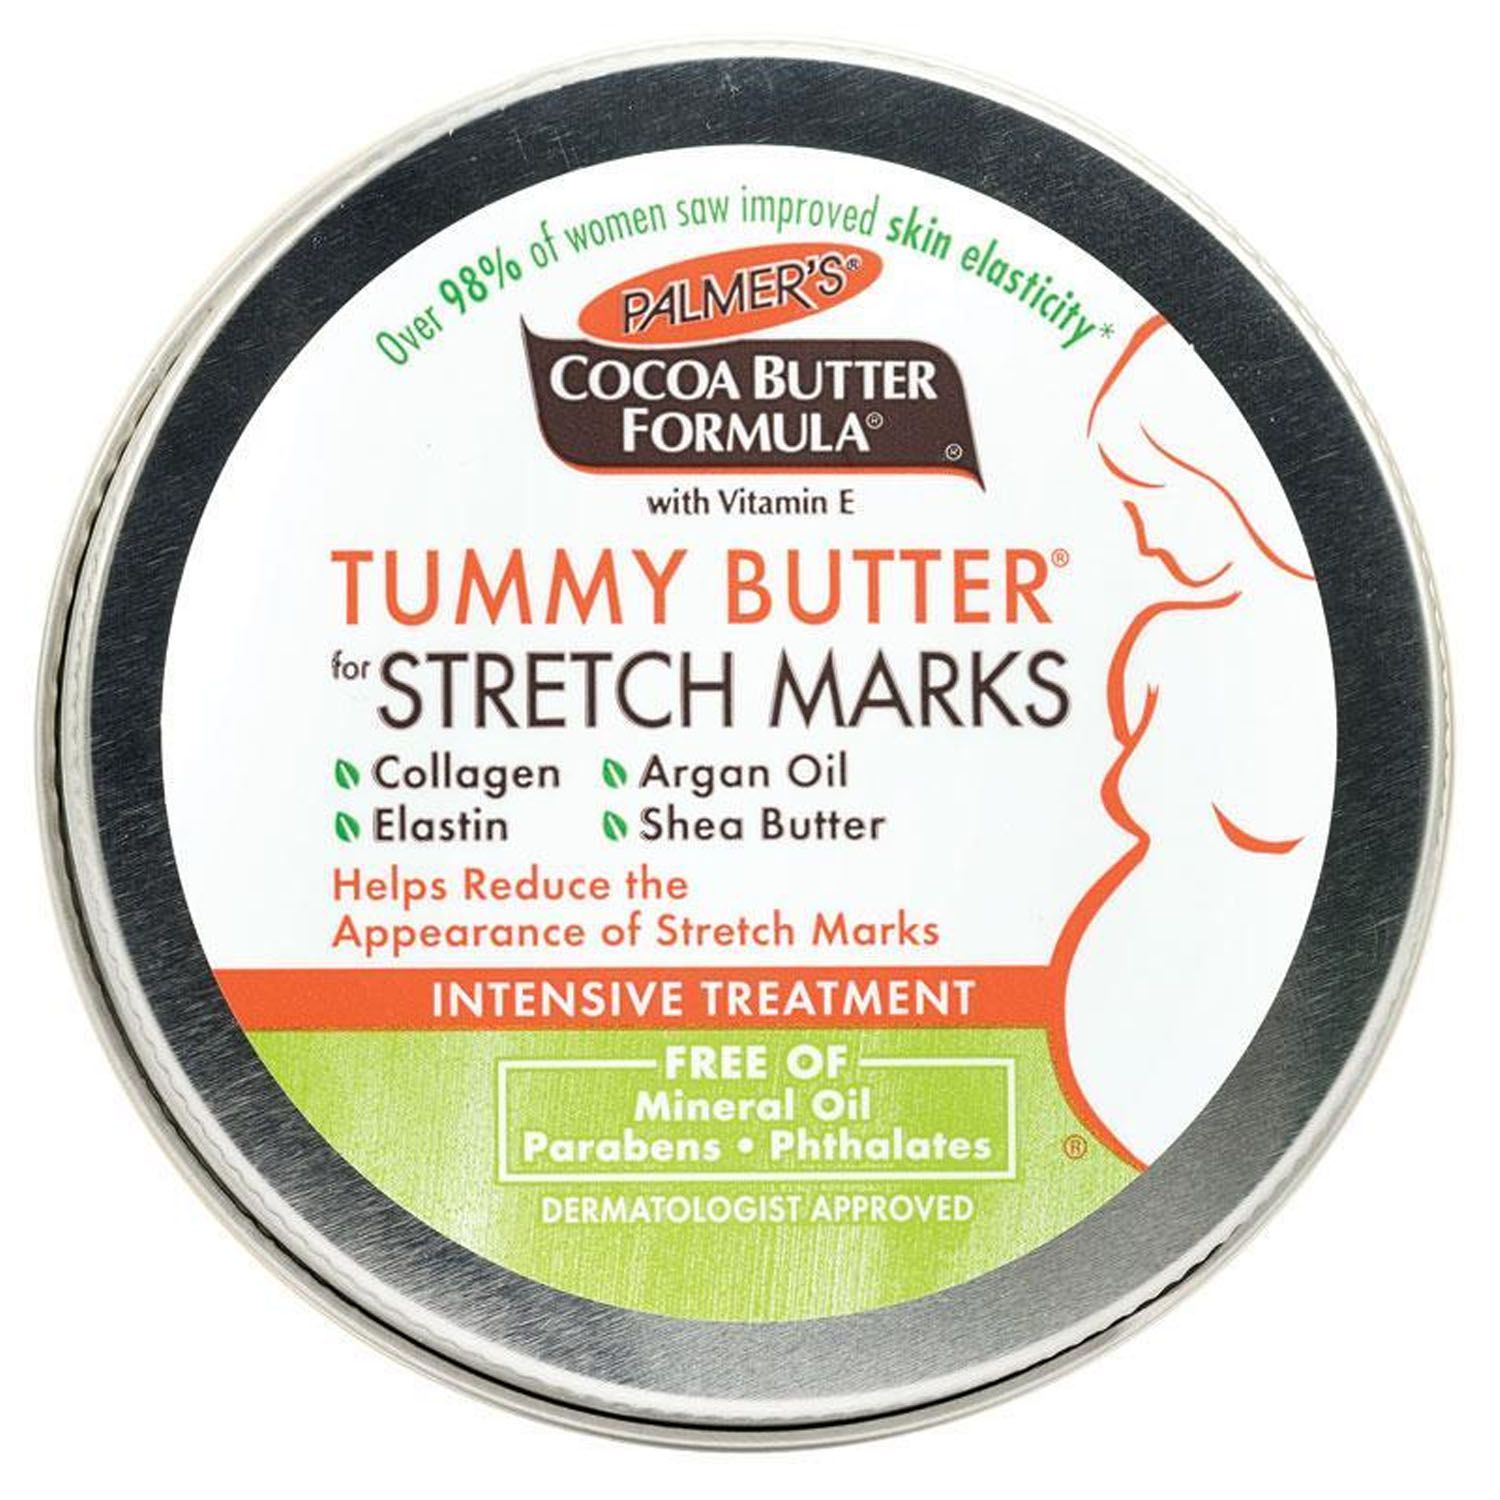 Cocoa Palmers Tummy Butter for Stretch Marks 125g Estrias Gravidez